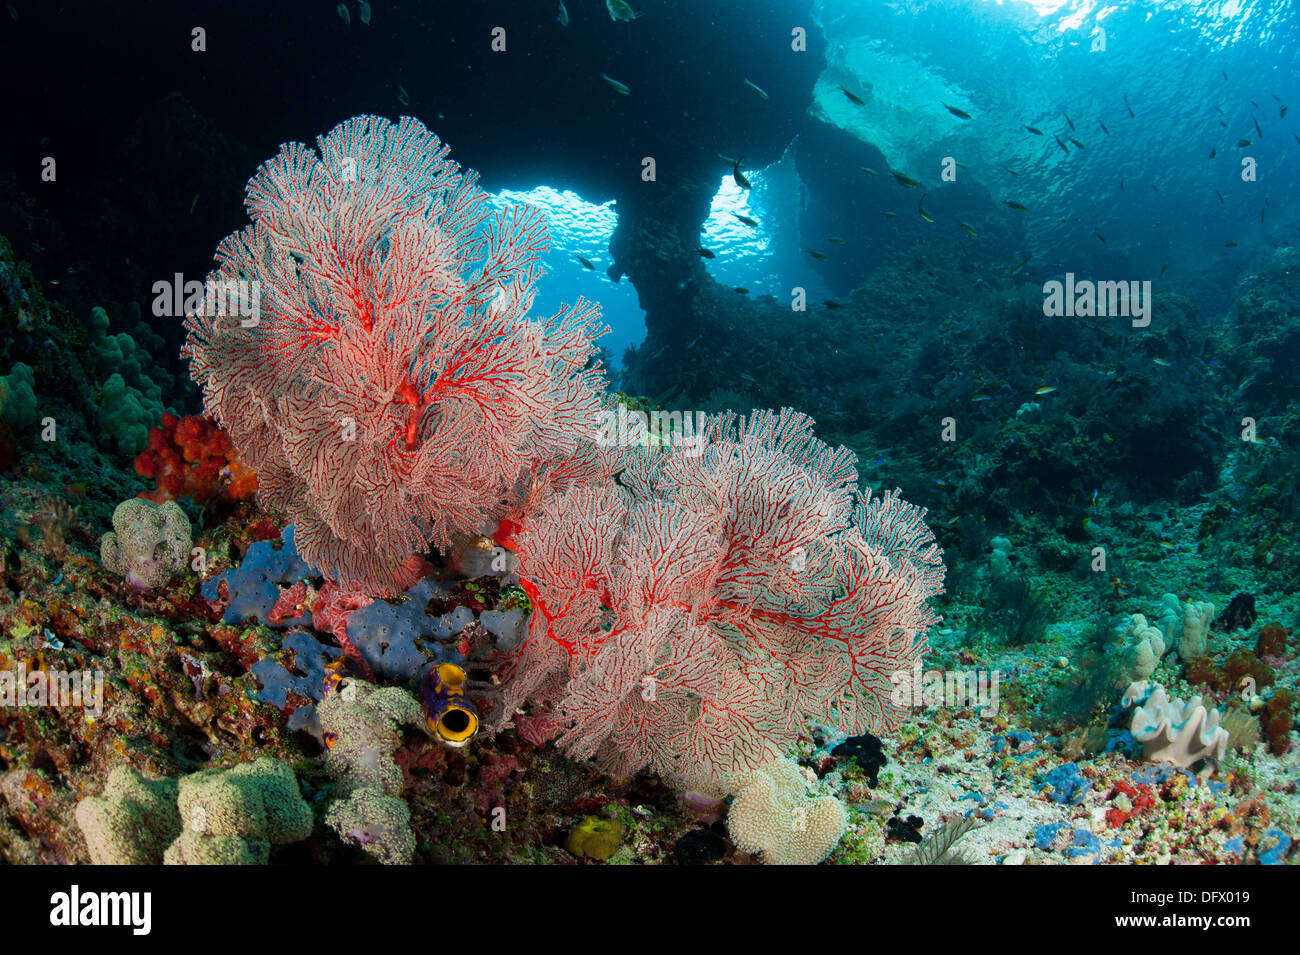 A gorgonian sea fan with the view of Boo Windows in the background, Southern Raja Ampat, West Papua, Indonesia. Stock Photo